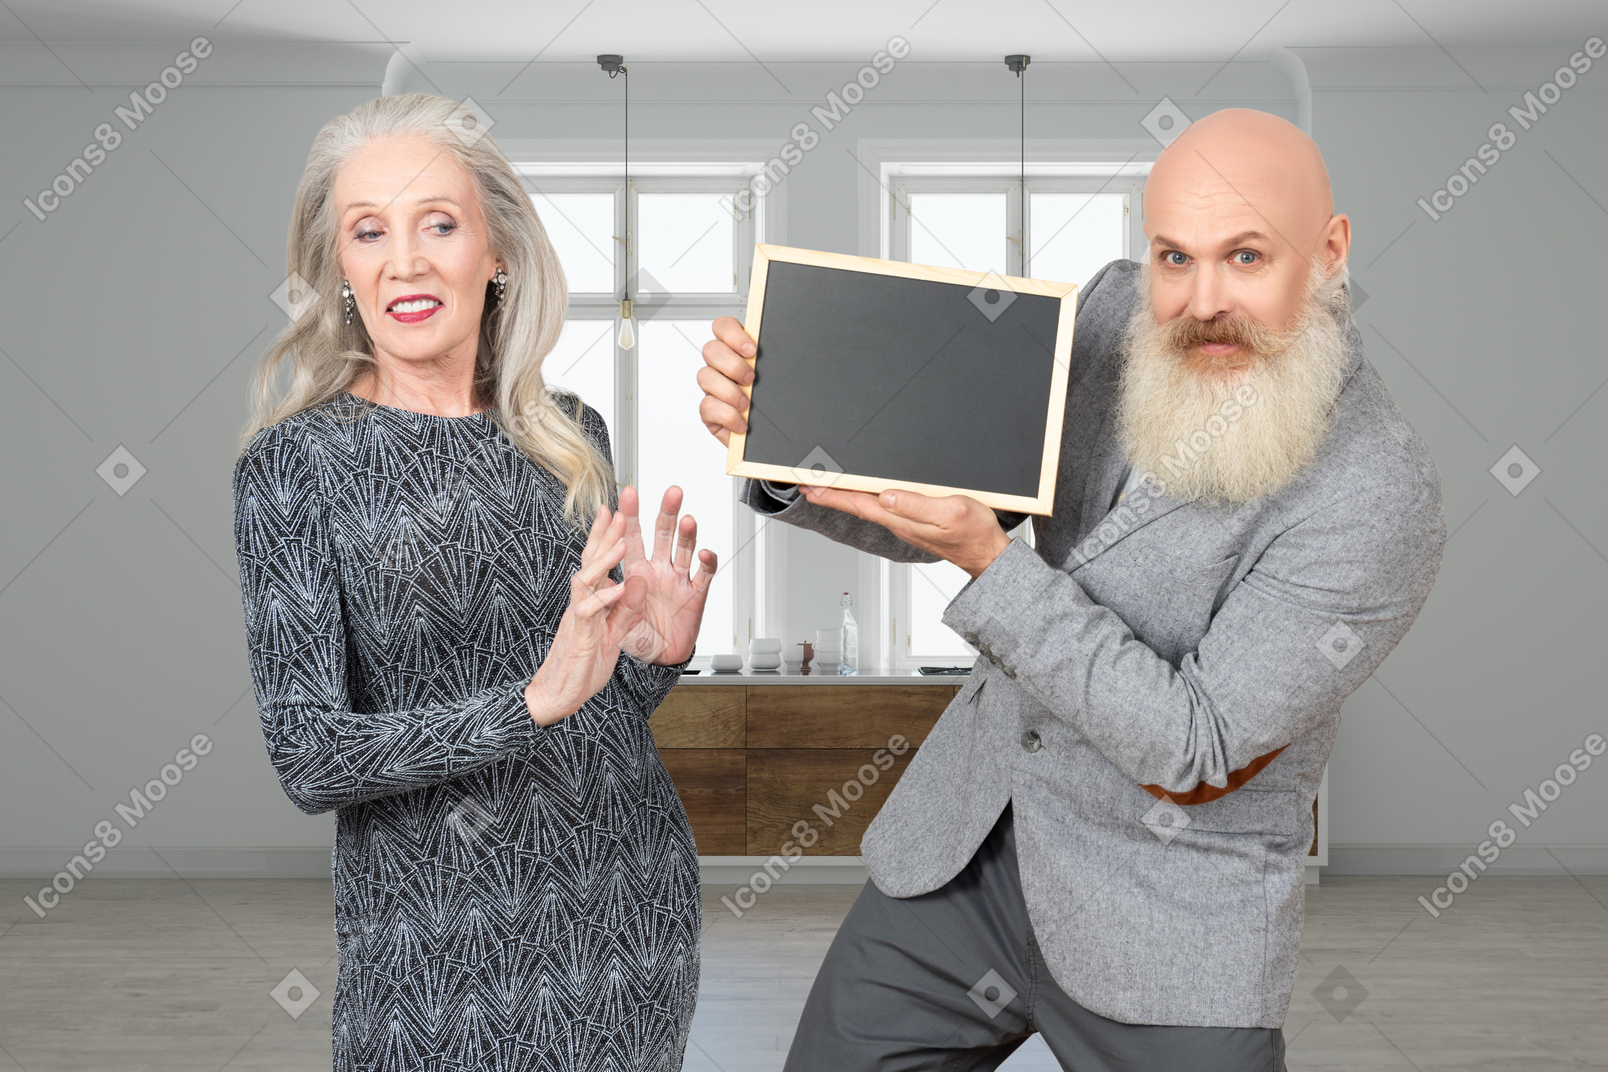 A man with a beard and a woman holding a blackboard